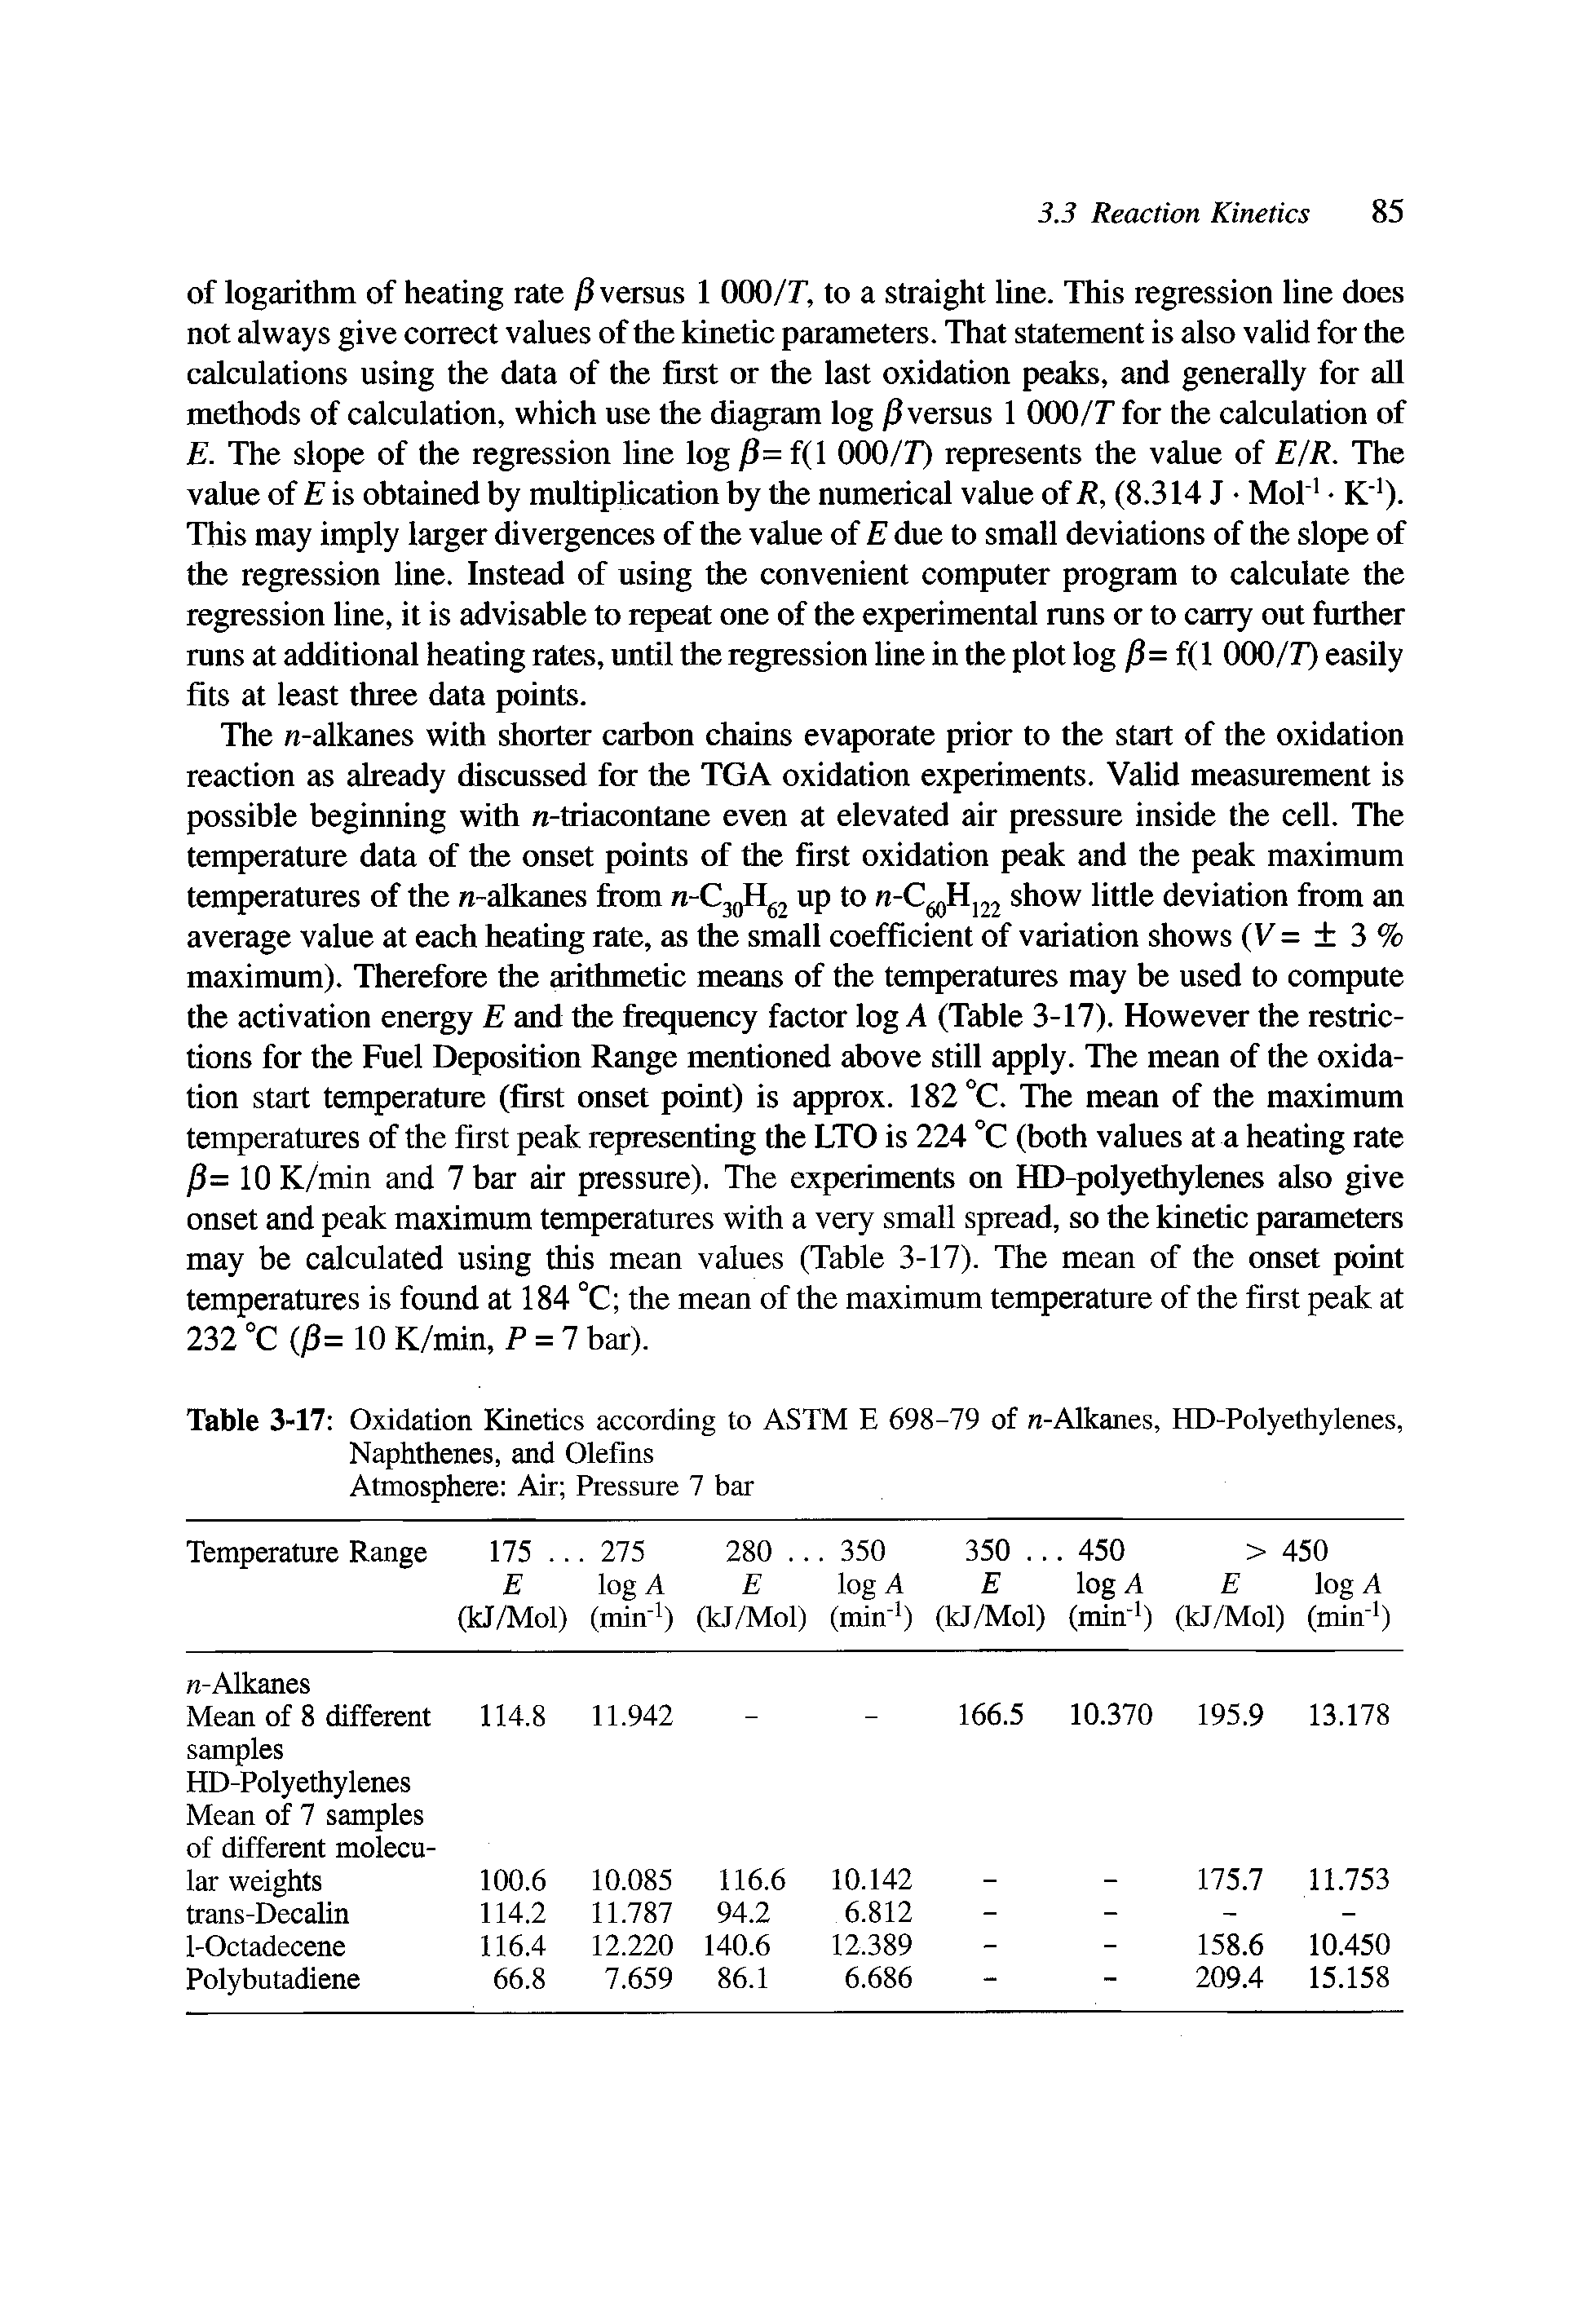 Table 3-17 Oxidation Kinetics according to ASTM E 698-79 of n-Alkanes, HD-Polyethylenes, Naphthenes, and Olefins Atmosphere Air Pressure 7 bar...